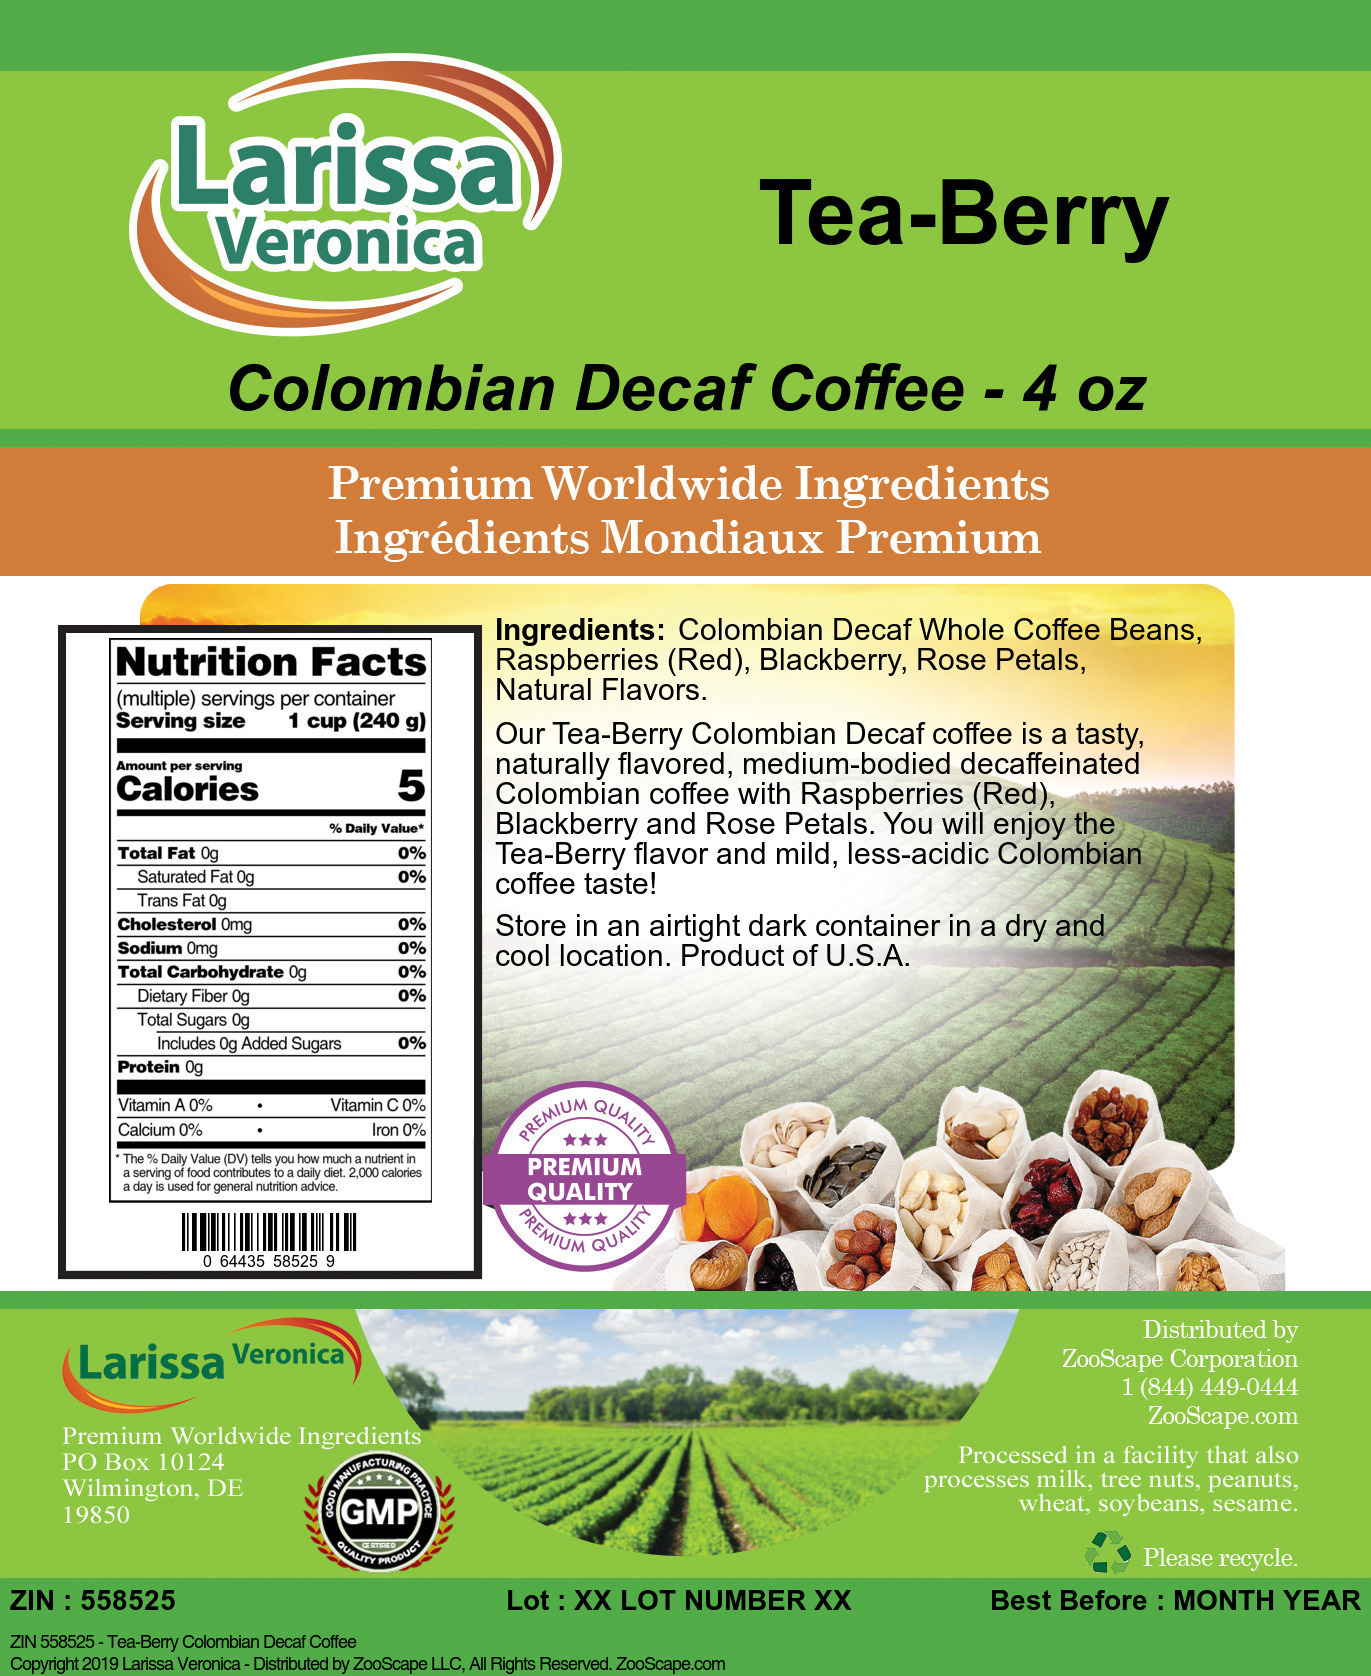 Tea-Berry Colombian Decaf Coffee - Label